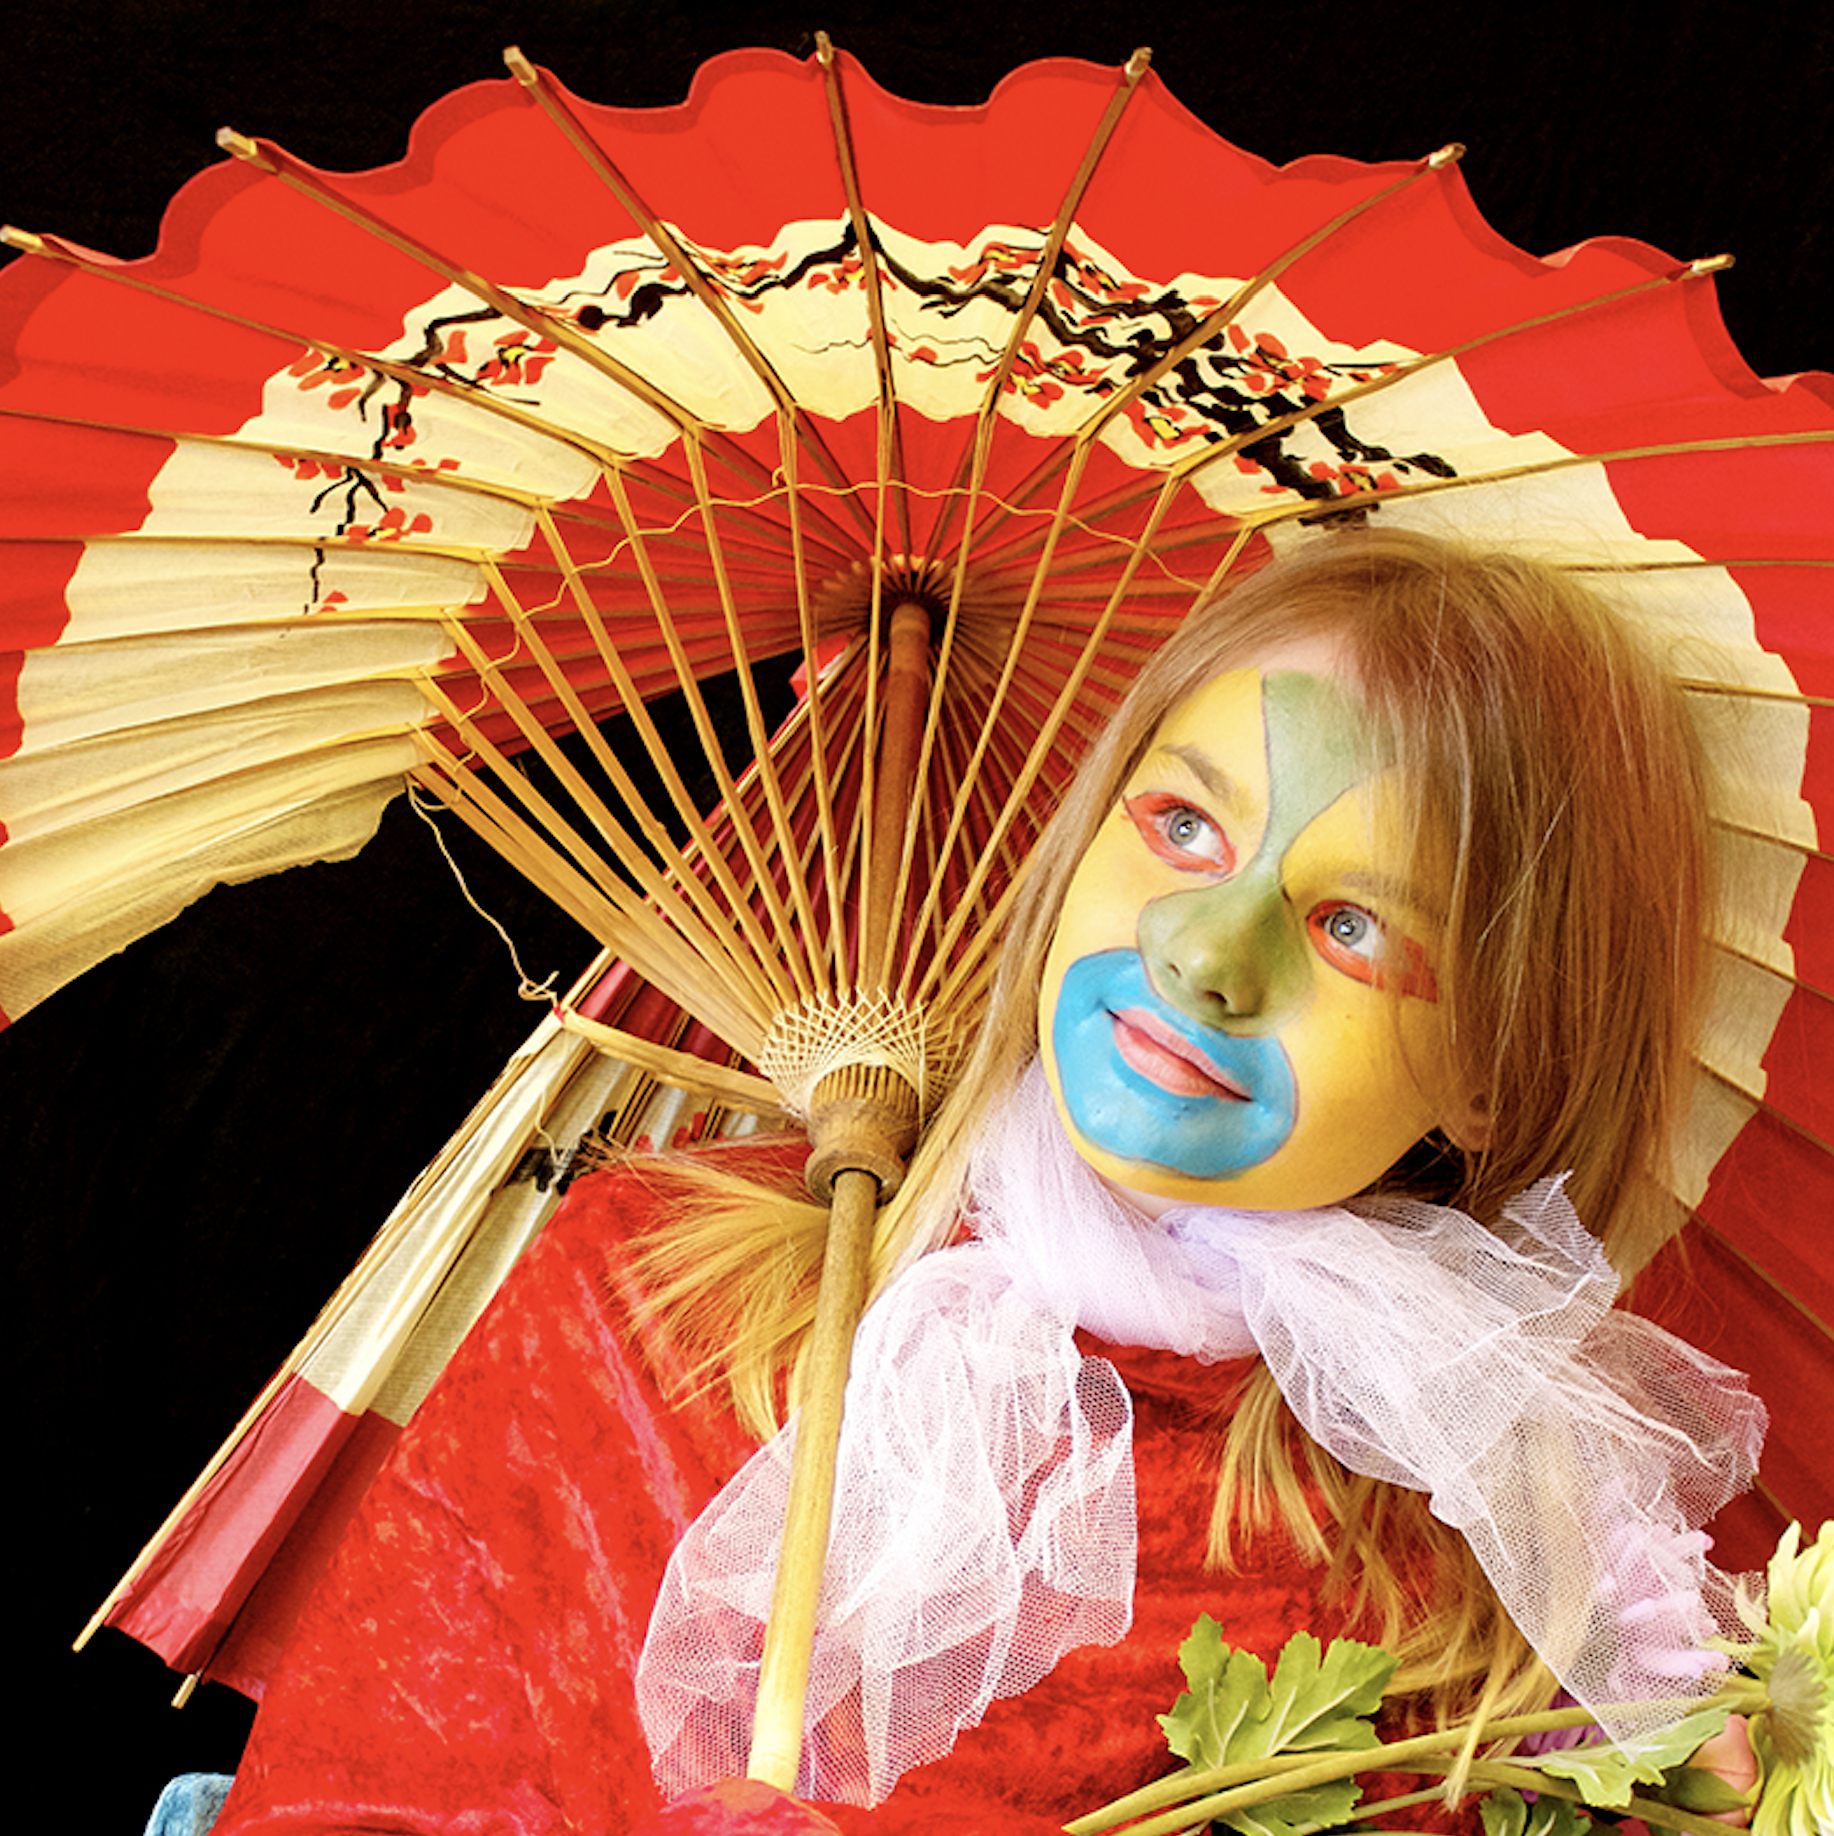 A girl with face paint and an umbrella